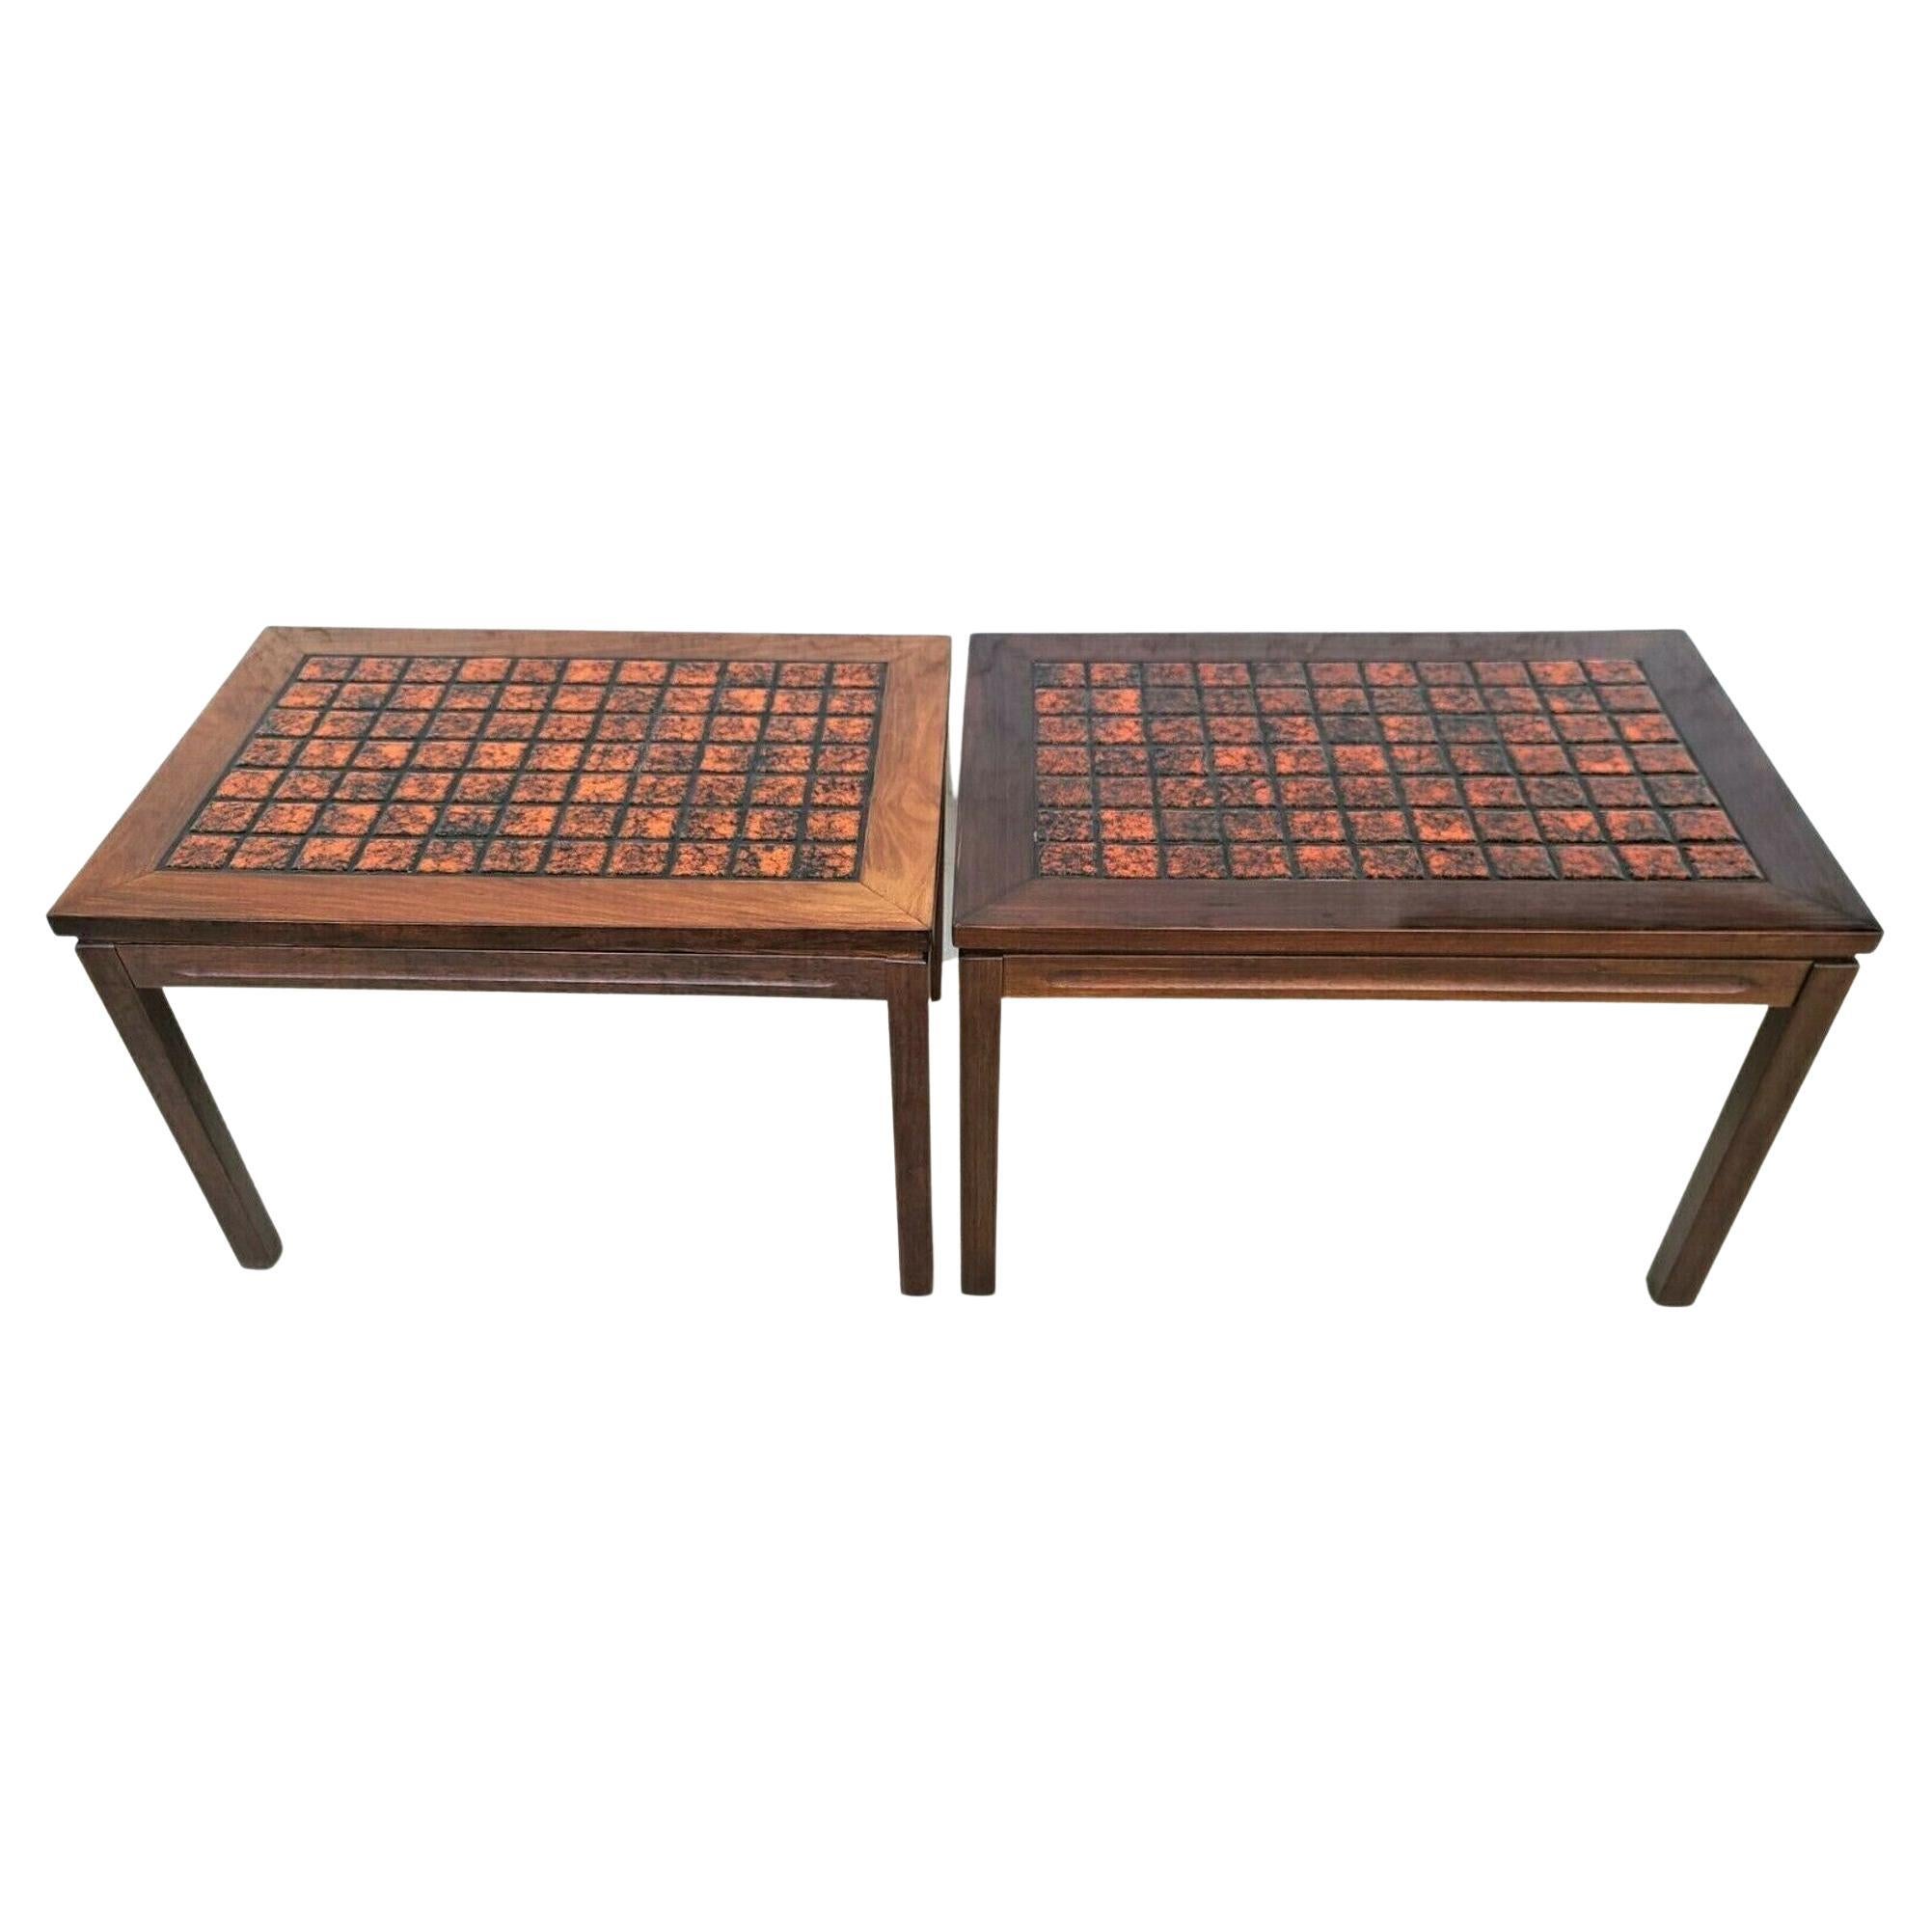 '2' MCM Danish Modern Rosewood Tile Side End Coffee Tables For Sale